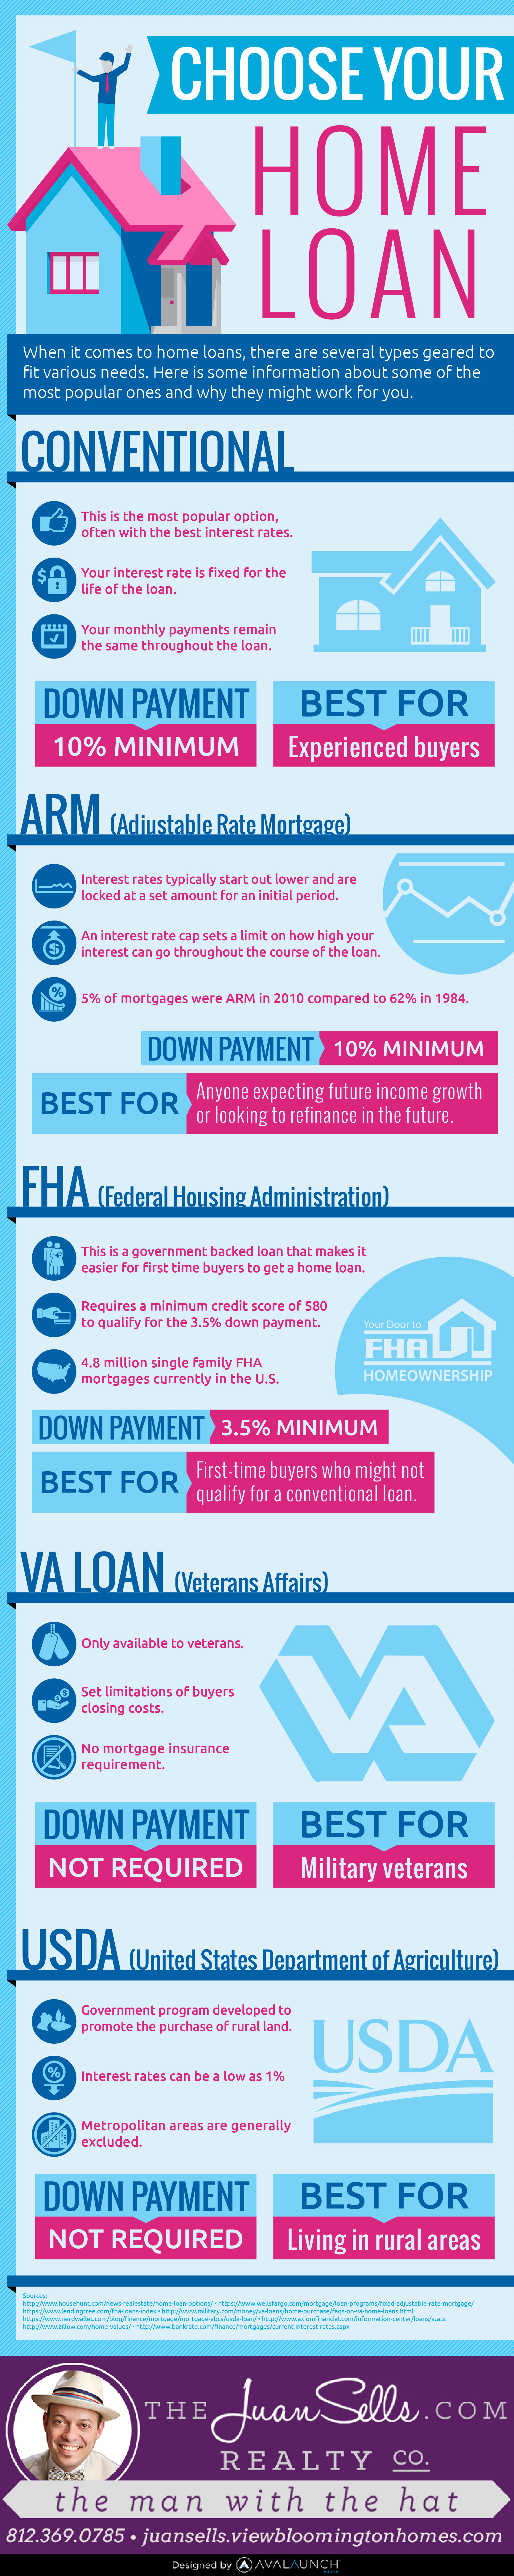 Information on choosing your home loan. Covers conventional, ARM, FHA, VA, and USDA loans.